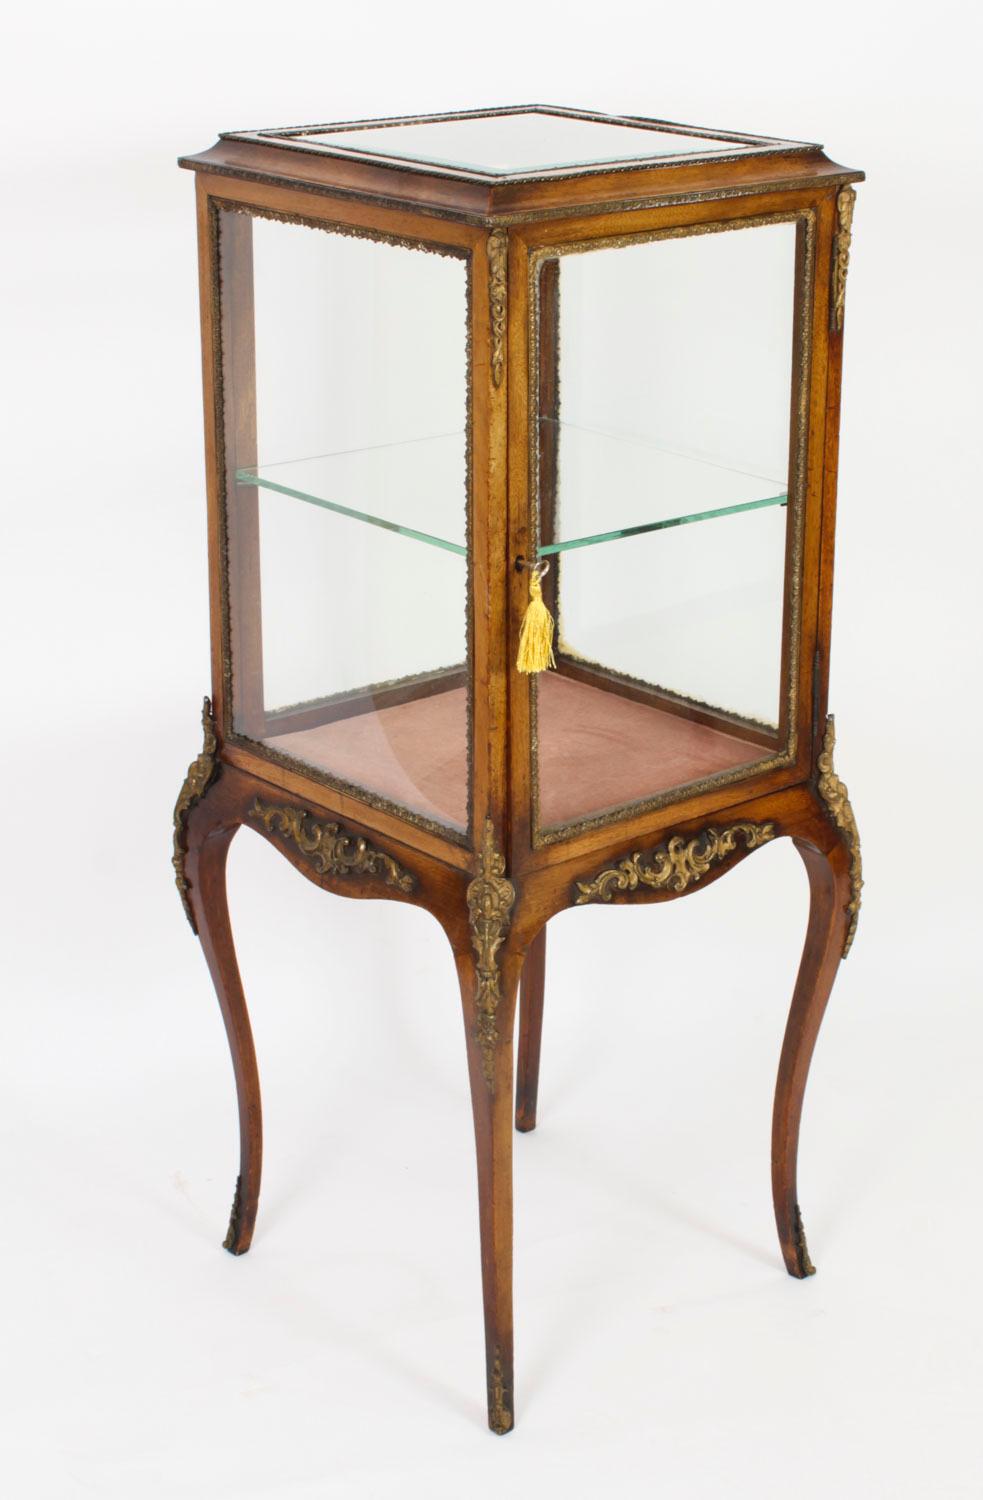 Antique Square Ormolu Mounted Vitrine Display Cabinet 19th Century For Sale 13